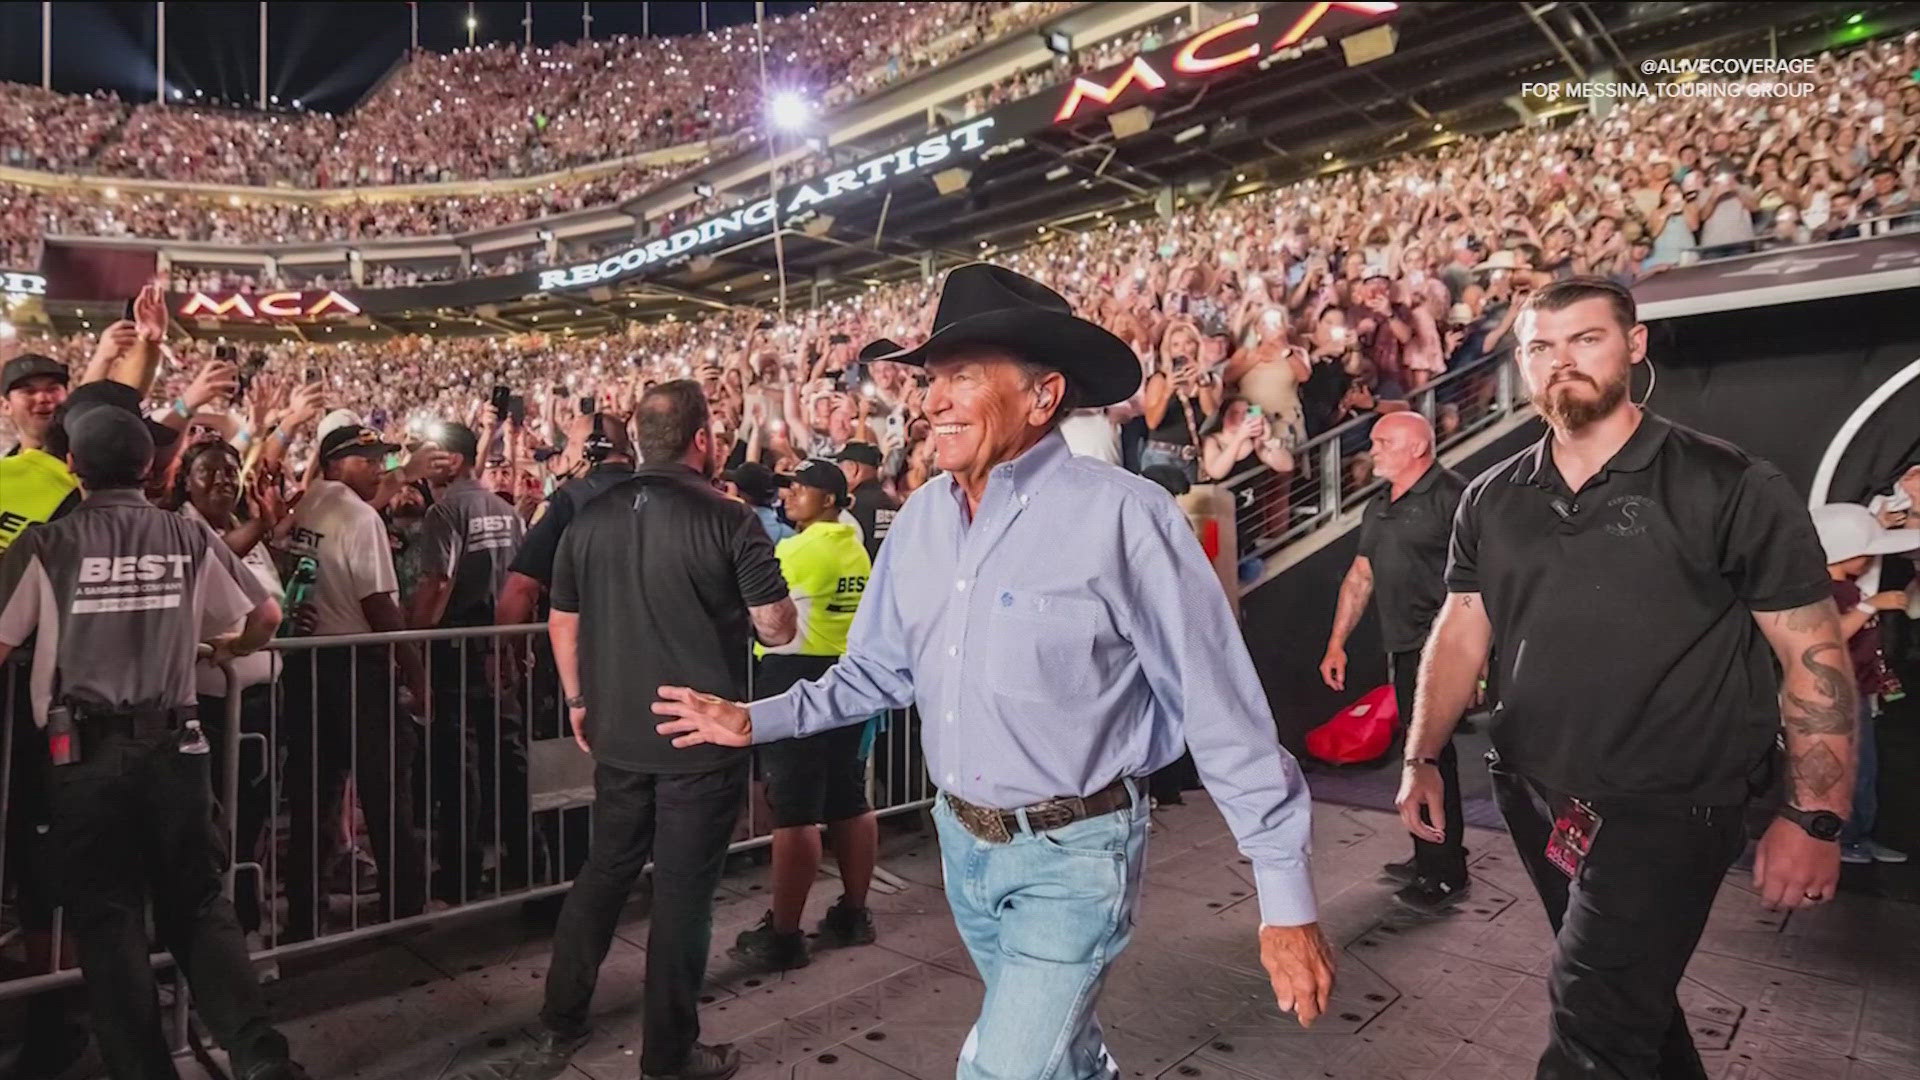 The "King of Country Music" is about to receive a huge honor.